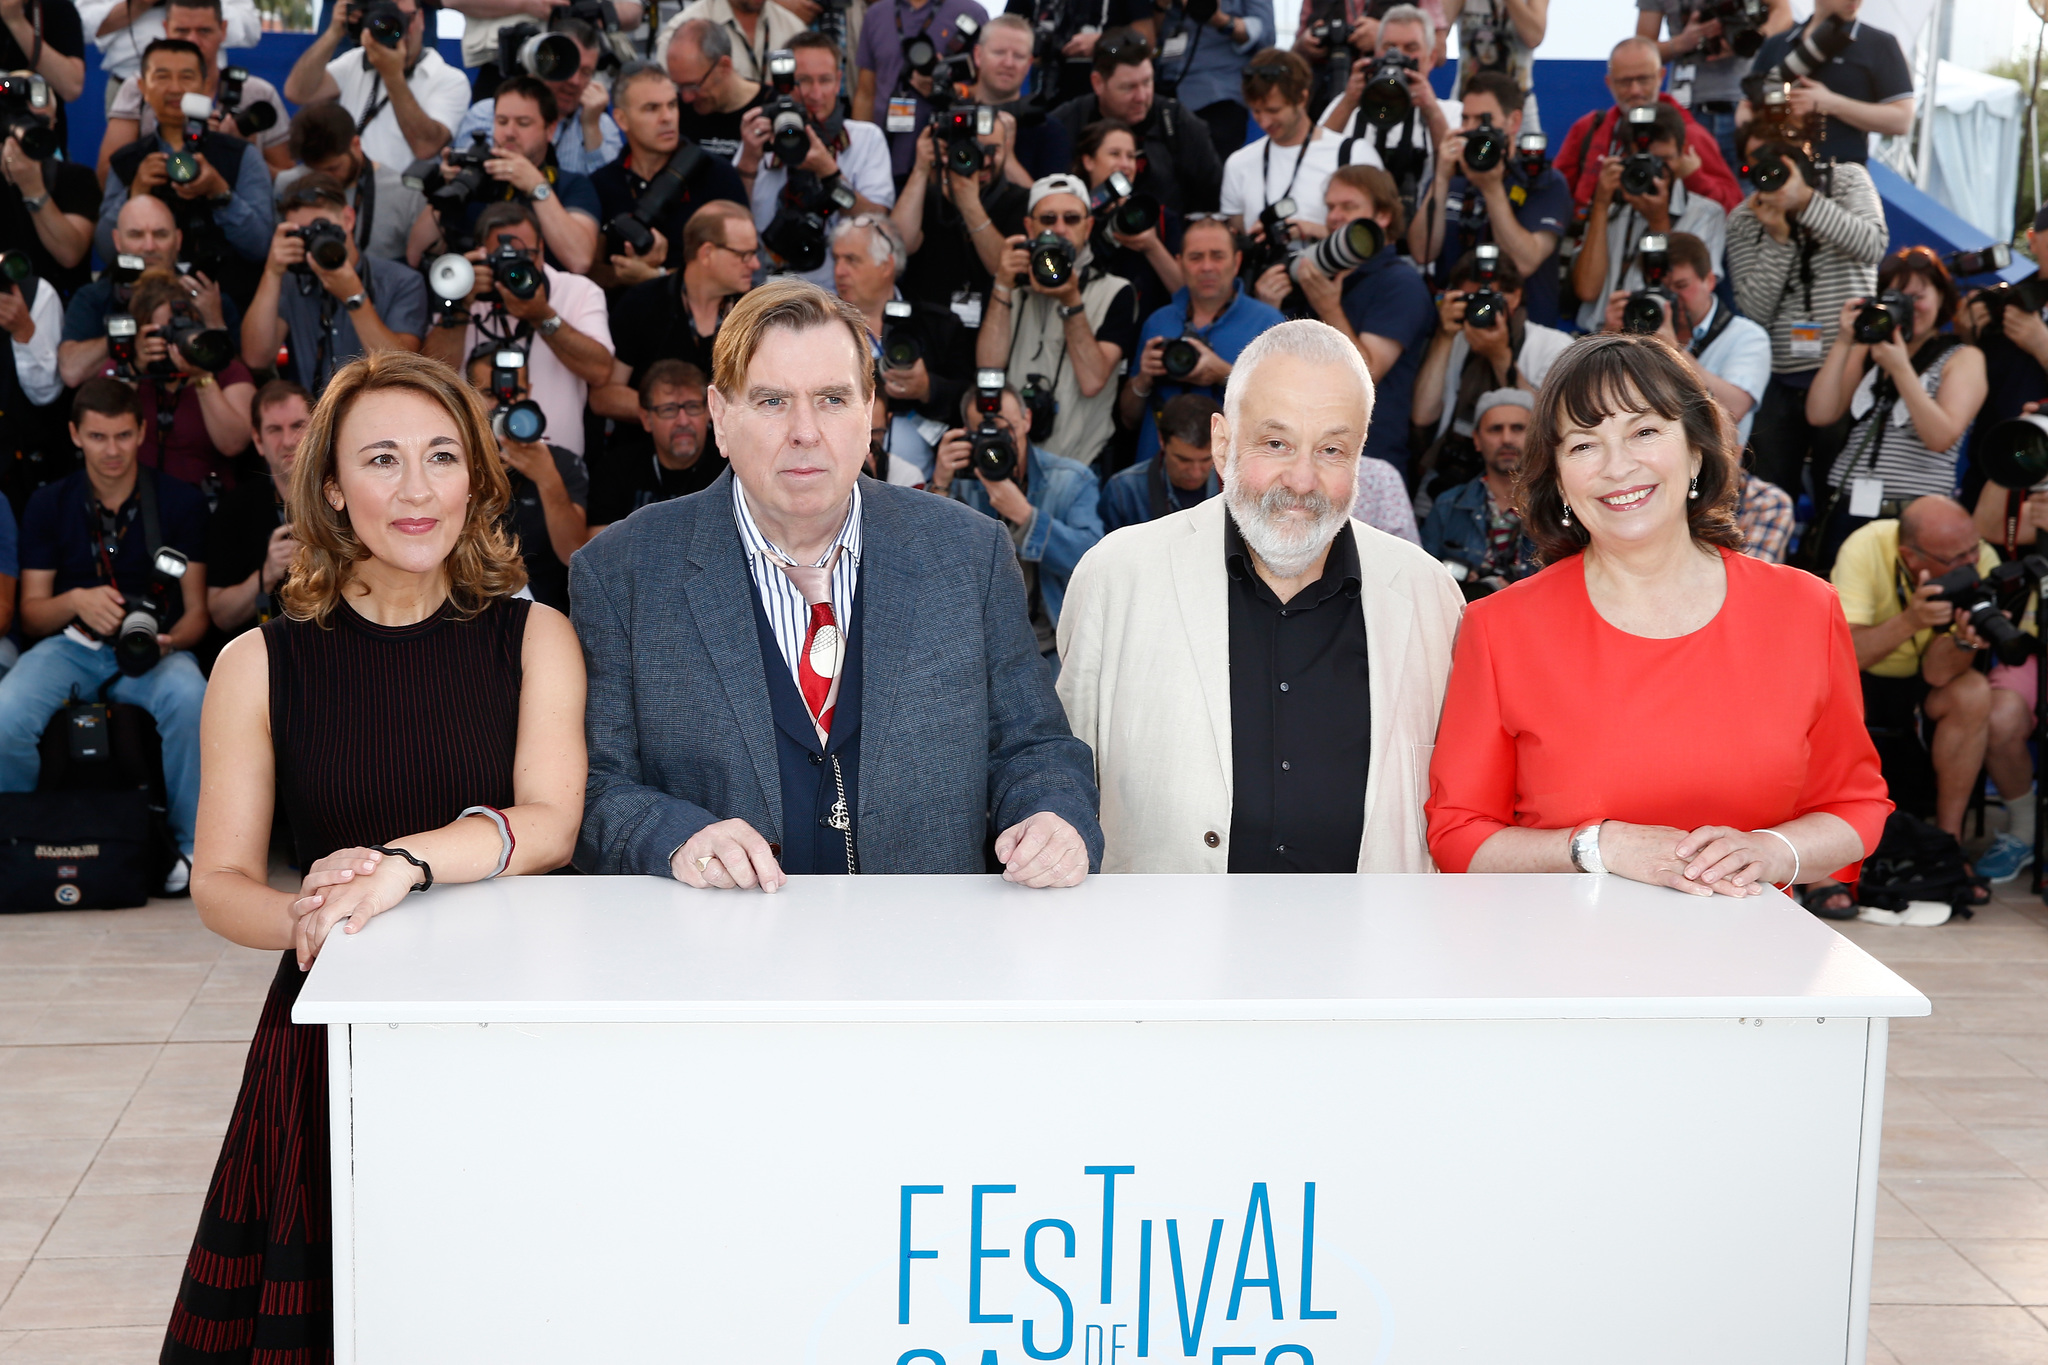 Timothy Spall, Mike Leigh, Dorothy Atkinson and Marion Bailey at event of Mr. Turner (2014)